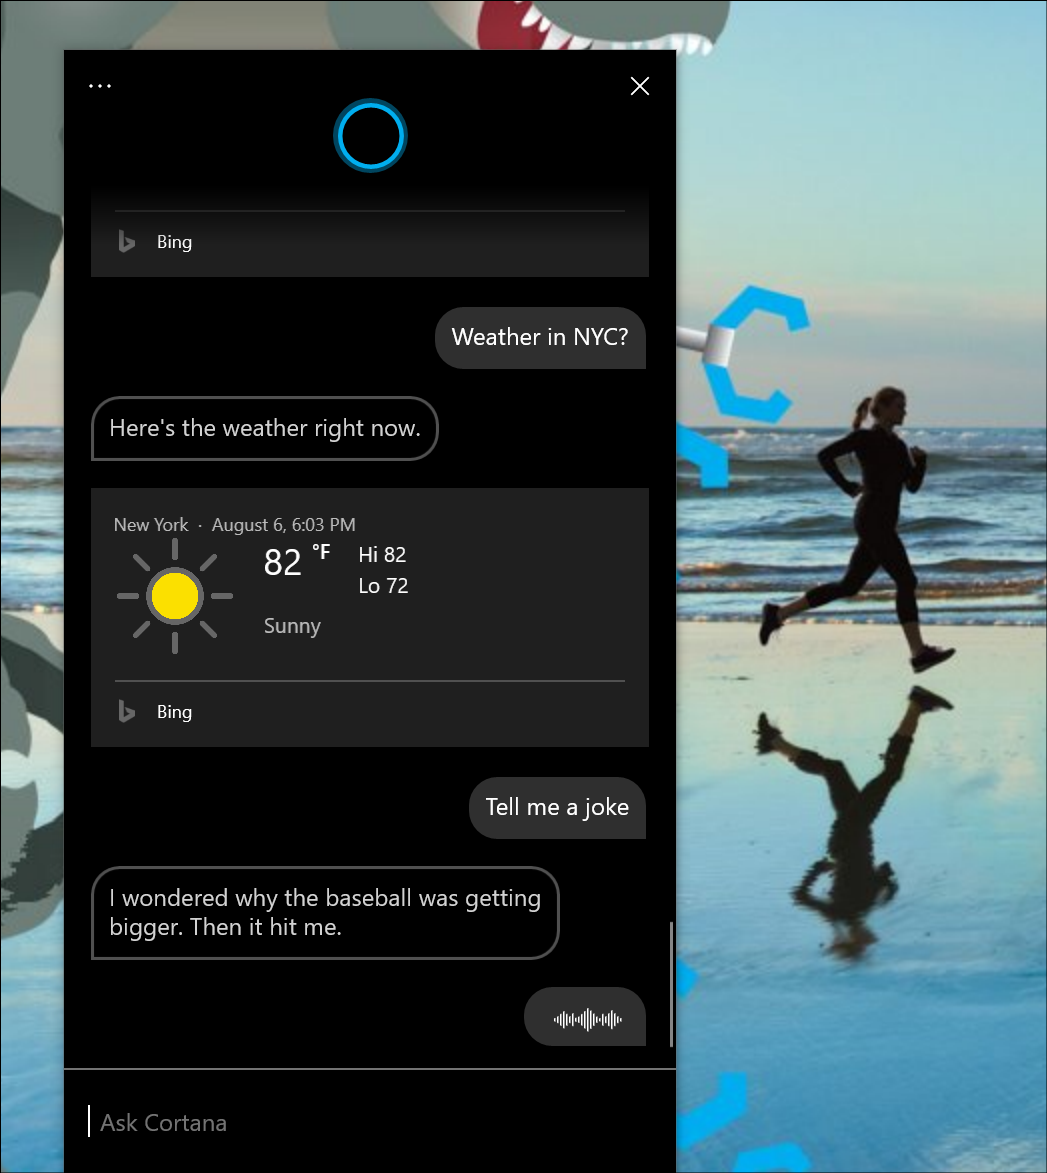 Showing the new Cortana experience, with a joke (“I wondered why the baseball was getting bigger. Then it hit me.”